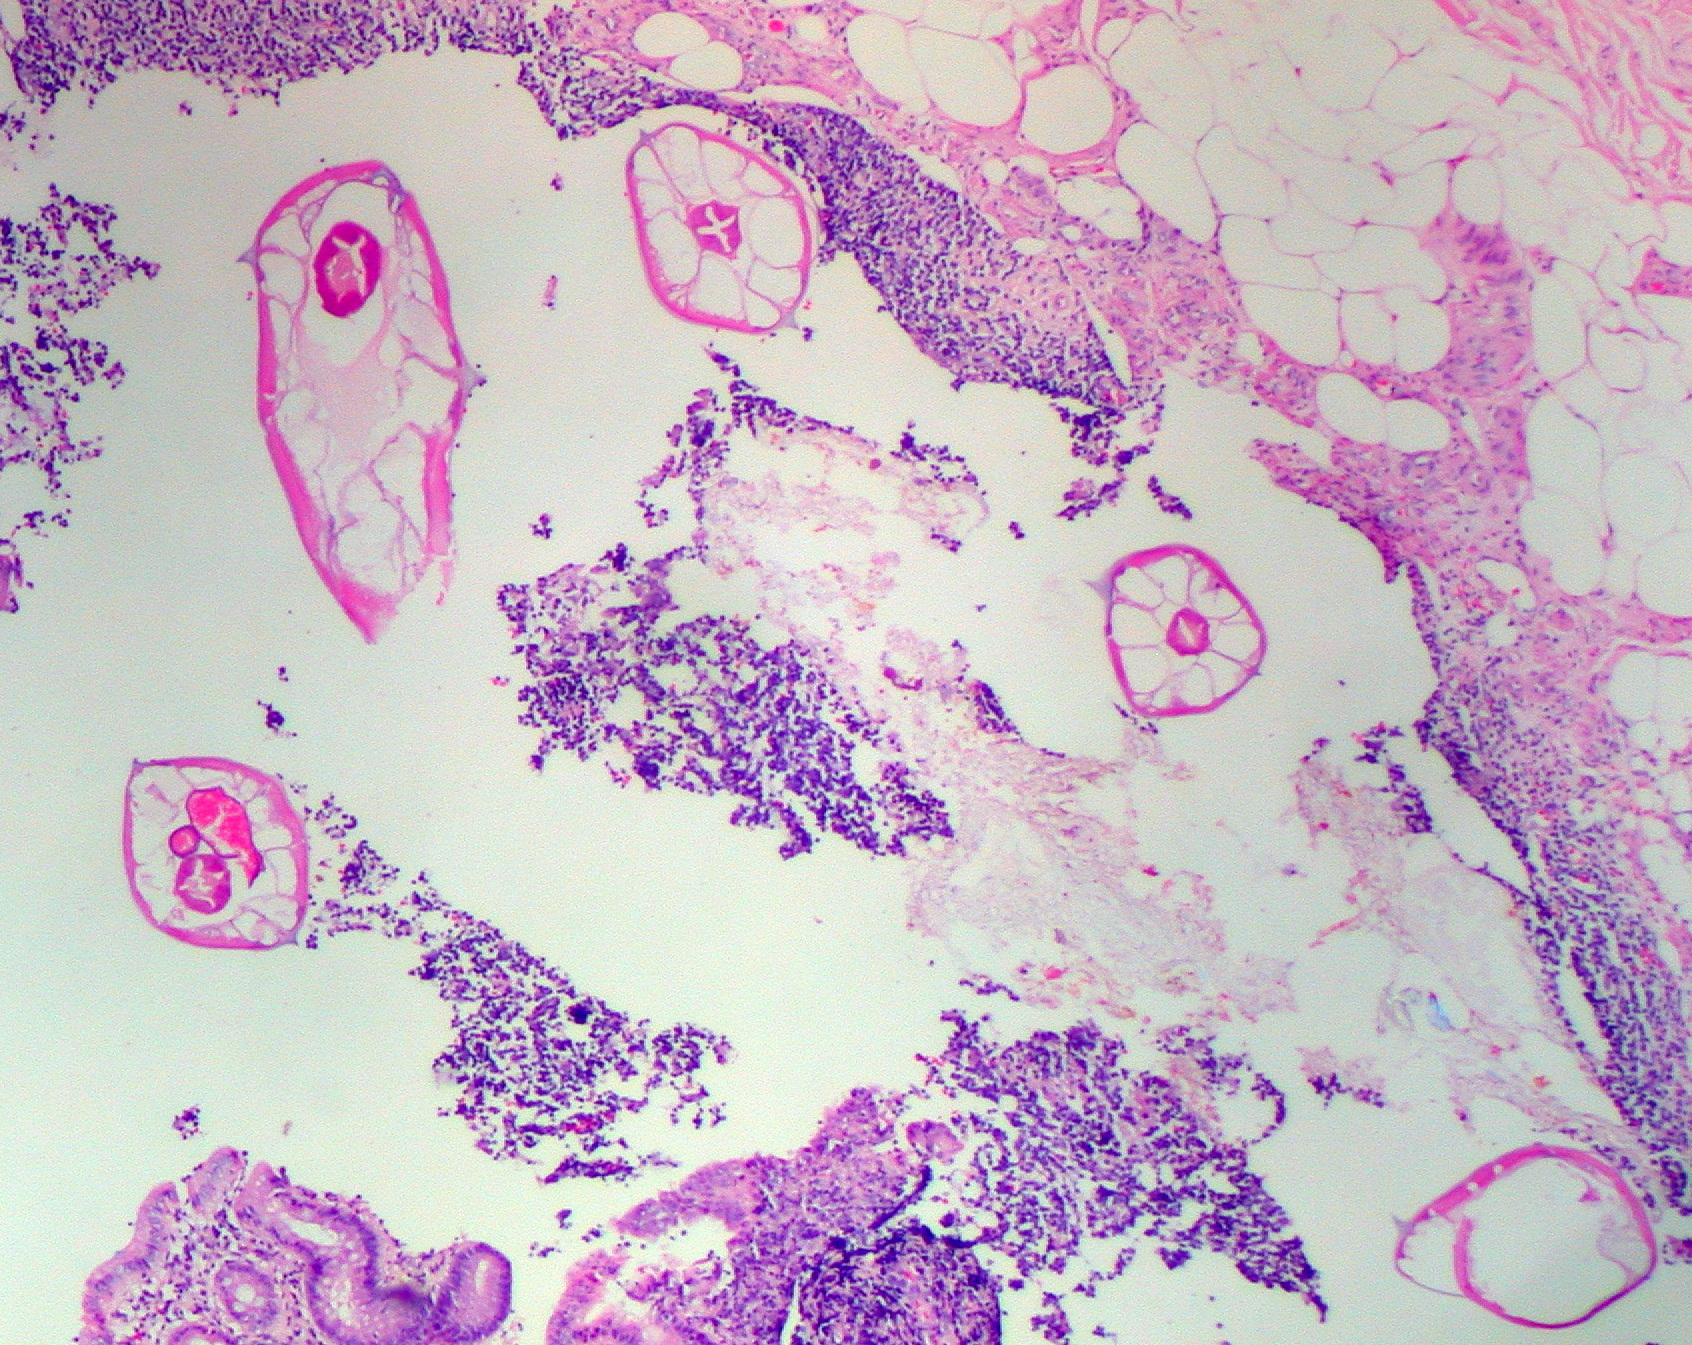 Pinworms are sometimes diagnosed incidentally by pathology. Micrograph of pinworms in the appendix. H&E stain.(By Ed Uthman, MD - http://www.flickr.com/photos/euthman/2395977781/, CC BY-SA 2.0, https://commons.wikimedia.org/w/index.php?curid=3850238)